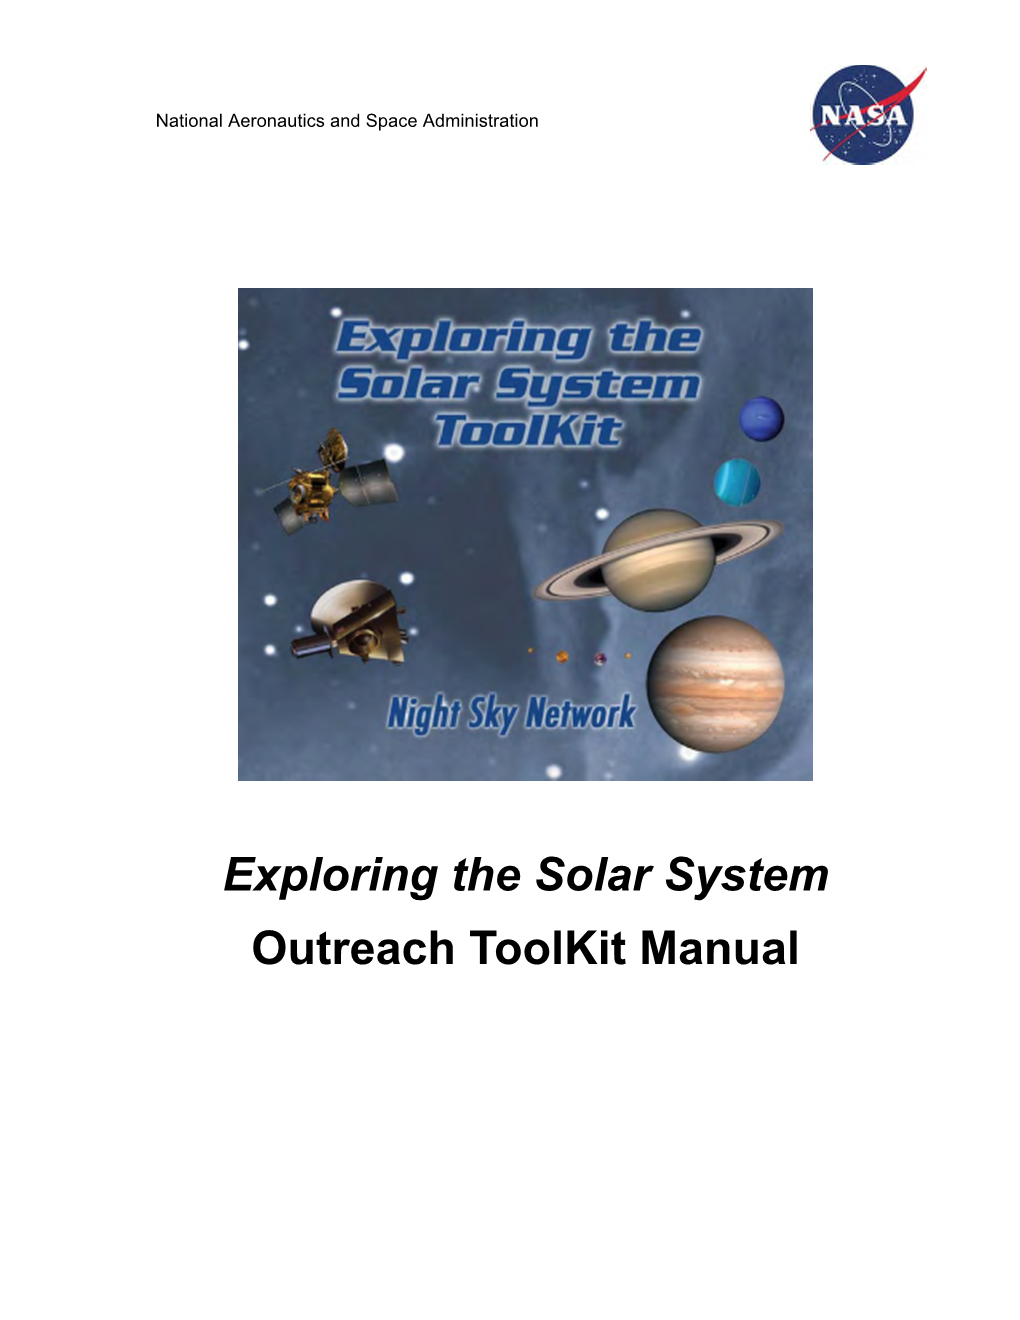 Exploring the Solar System Outreach Toolkit Manual